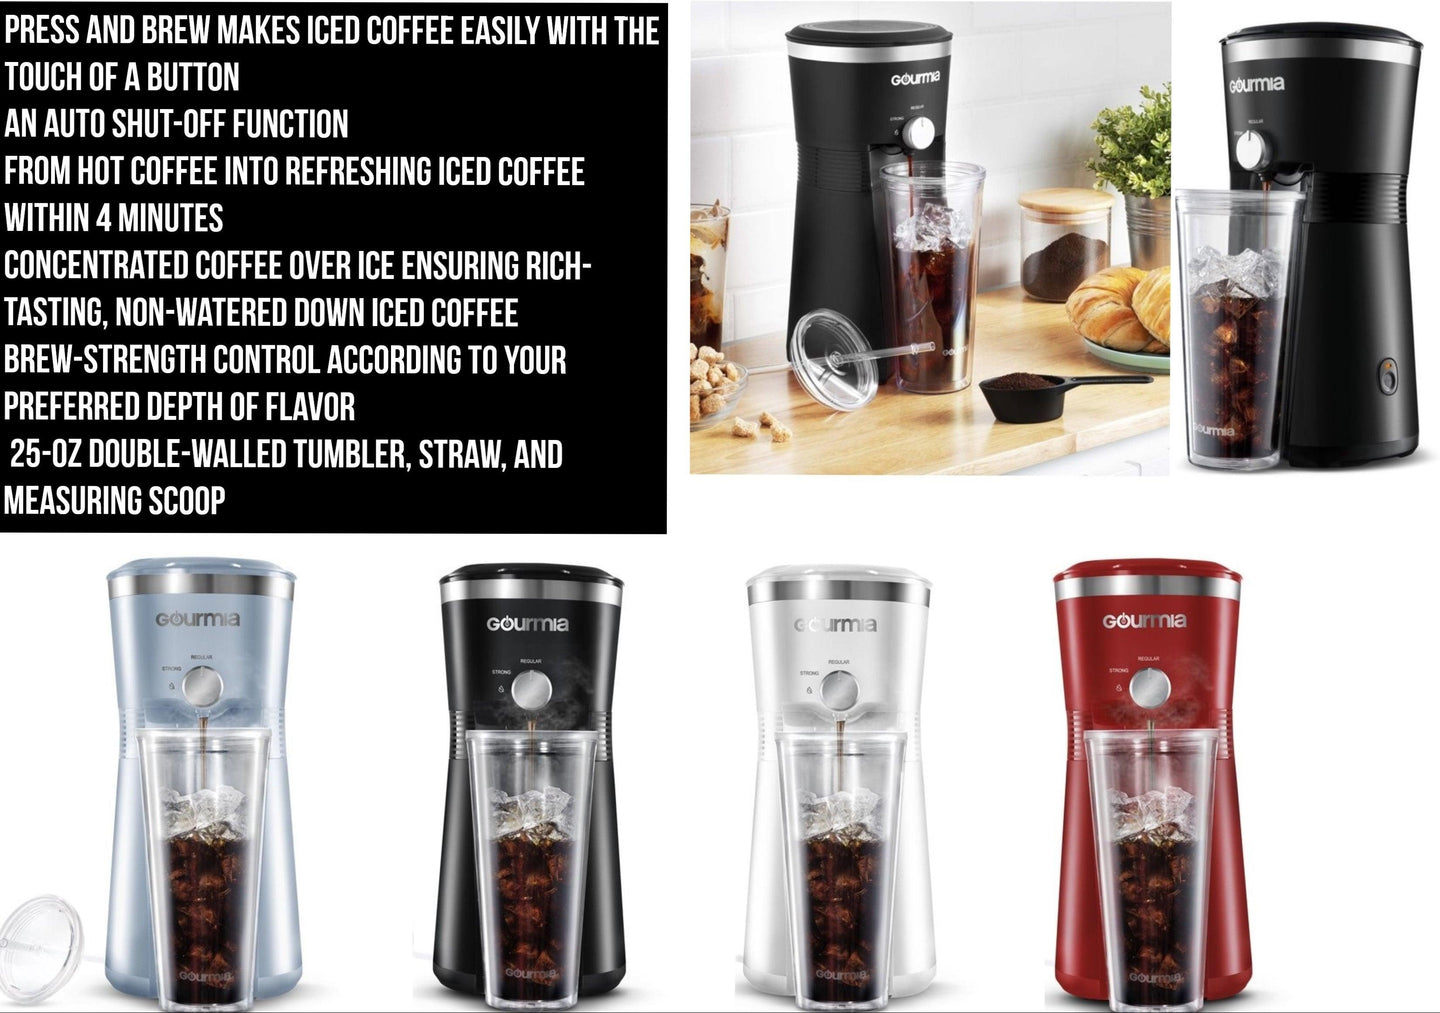 Iced Coffee Maker with Brew Control, Reusable Filter and free Tumbler by Gourmia - PremiumBrandGoods